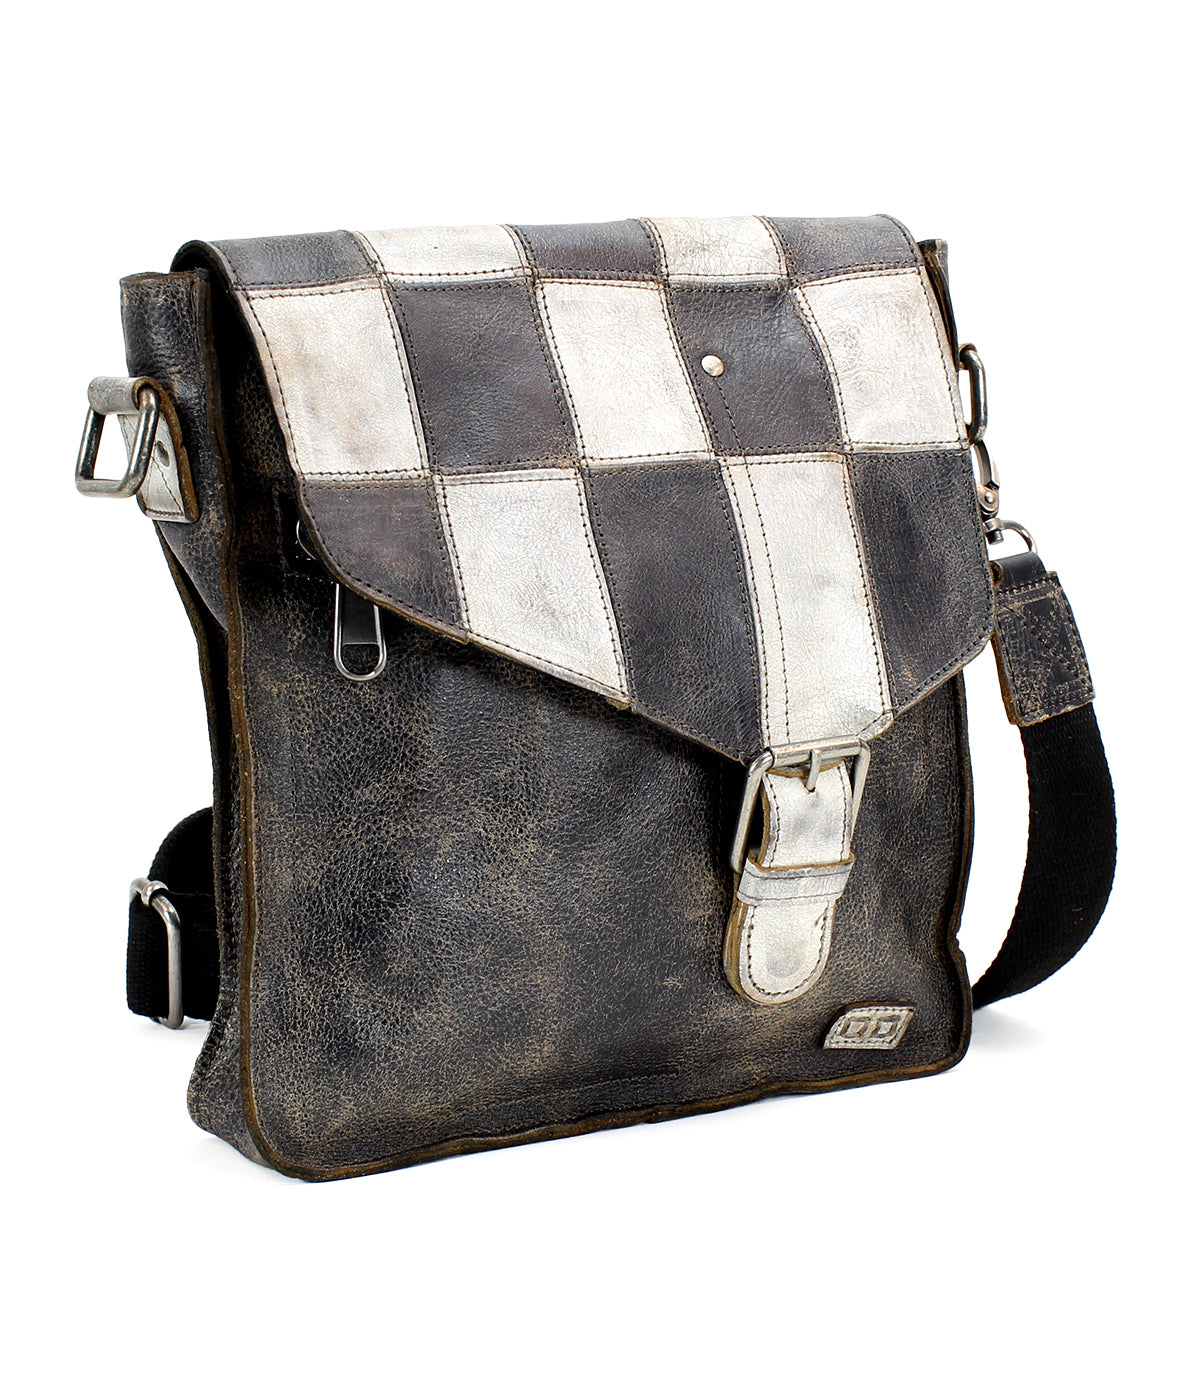 A functional Venice Beach II leather messenger bag displaying a checkered front panel in shades of black, white, and brown, set against a white background by Bed Stu.